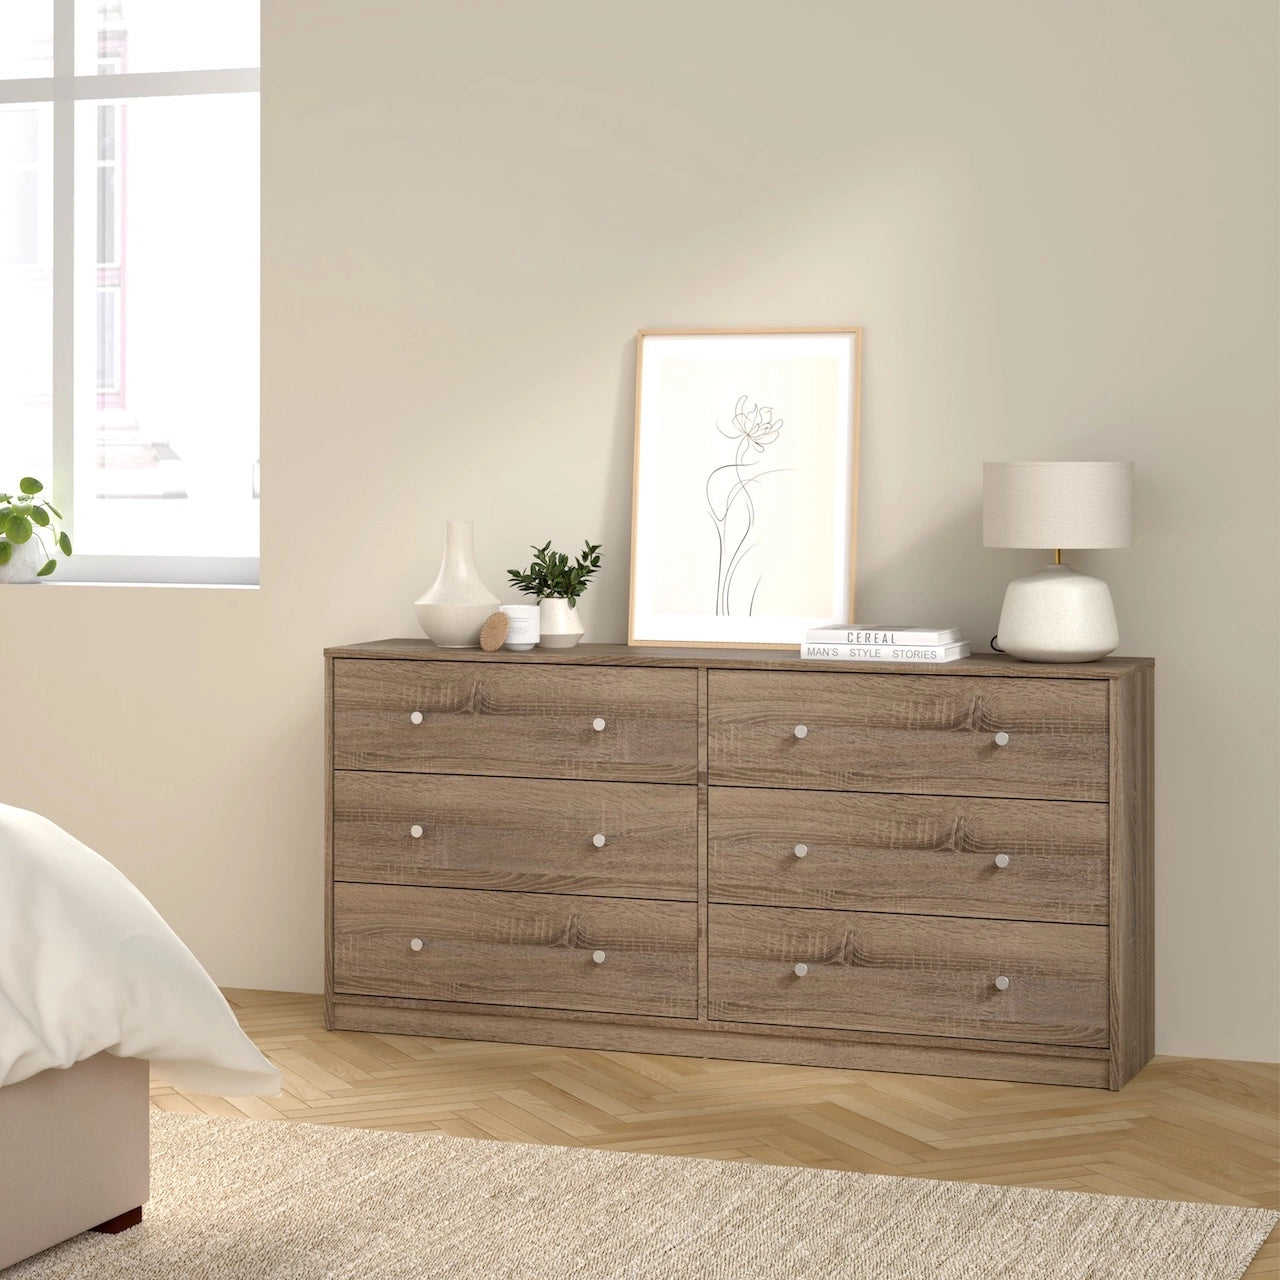 Furniture To Go May Chest of 6 Drawers (3+3) in Truffle Oak